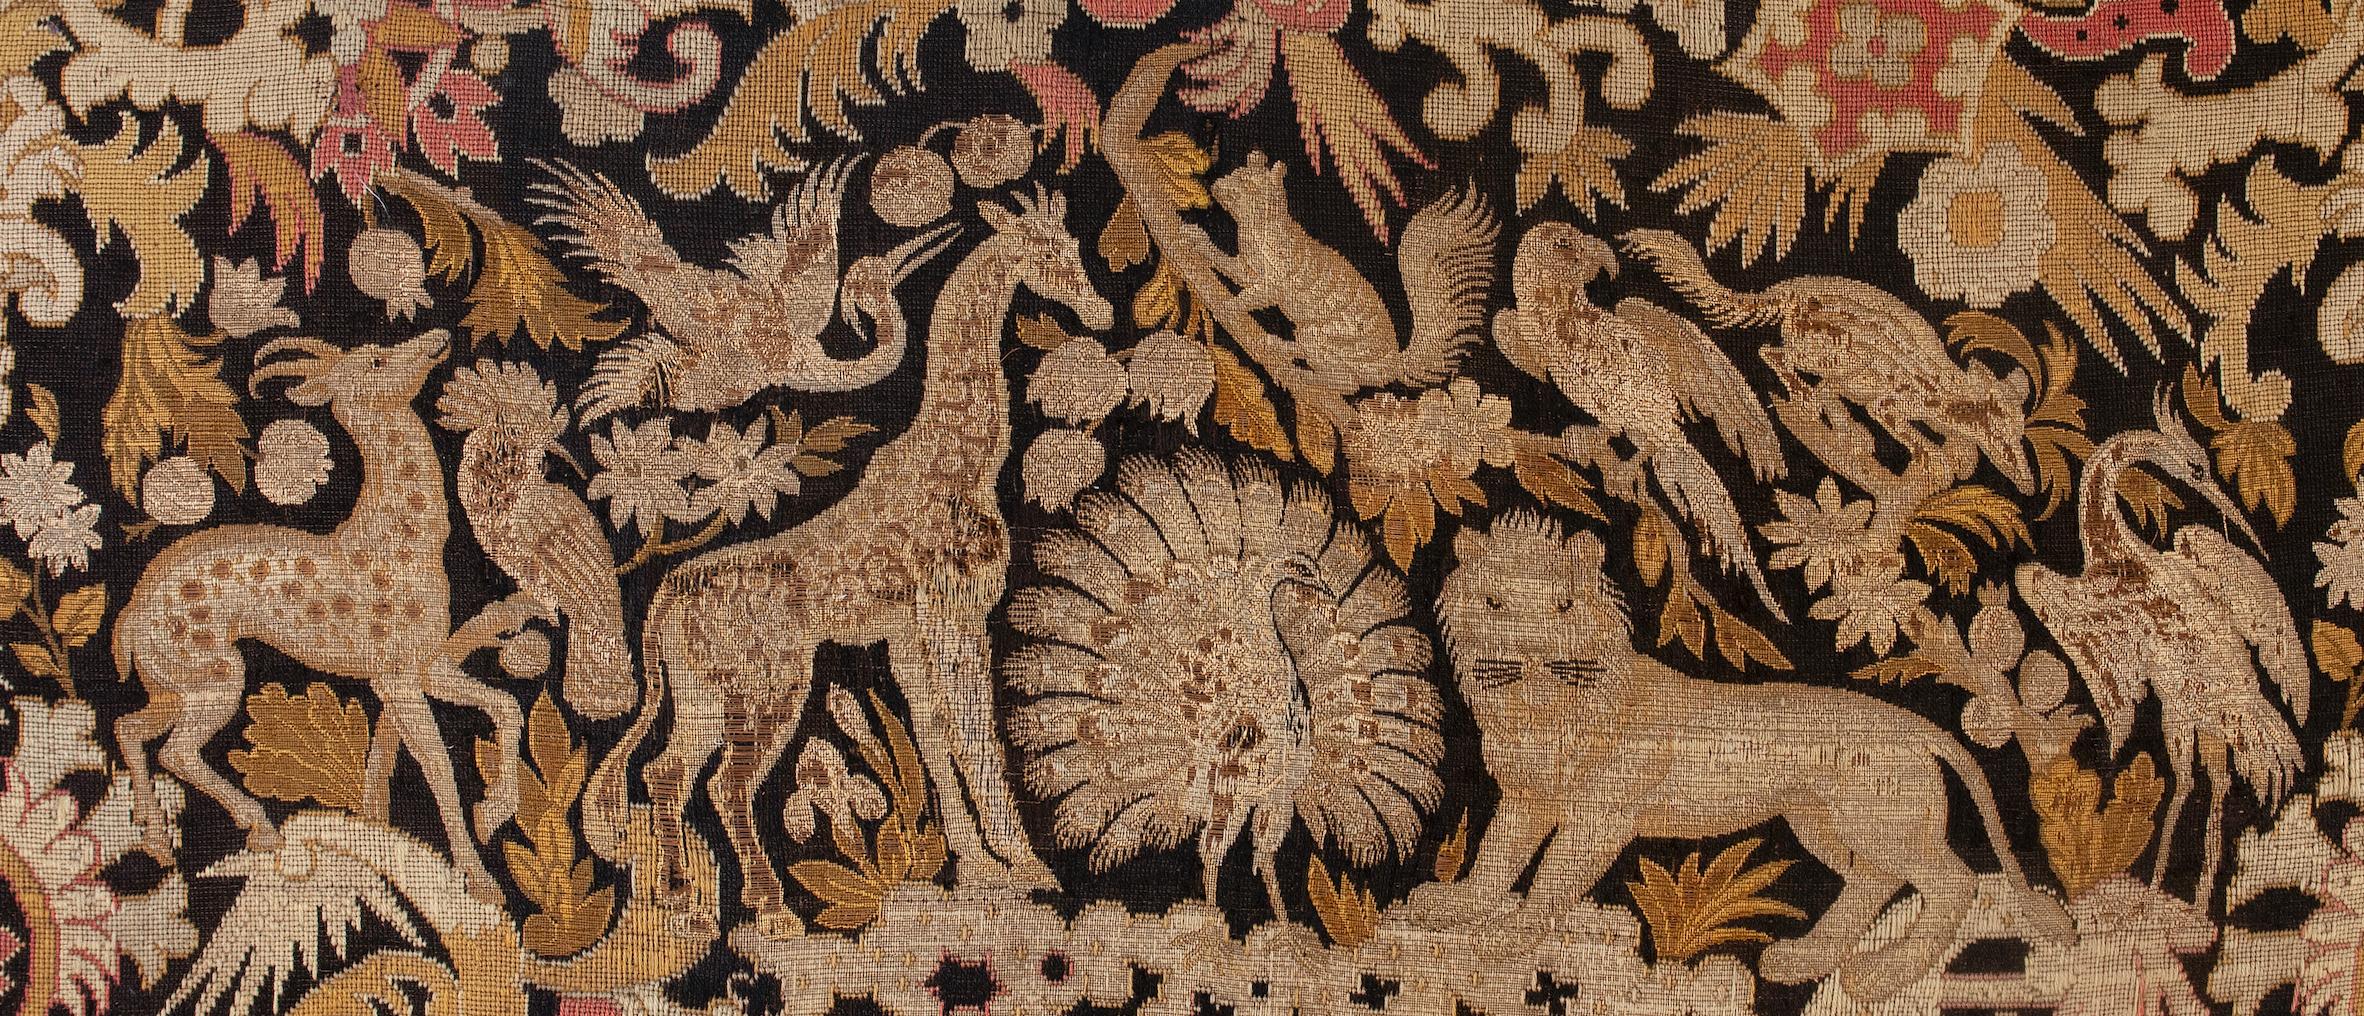 Rare folk, naive, vernacular tapestry
- Mythical quality depicting reminiscent of a garden of paradise with the animals and birds in harmony with each other.
- Charming tapestry depicting a peacock, girafe, lion, deer and exotic birds within a